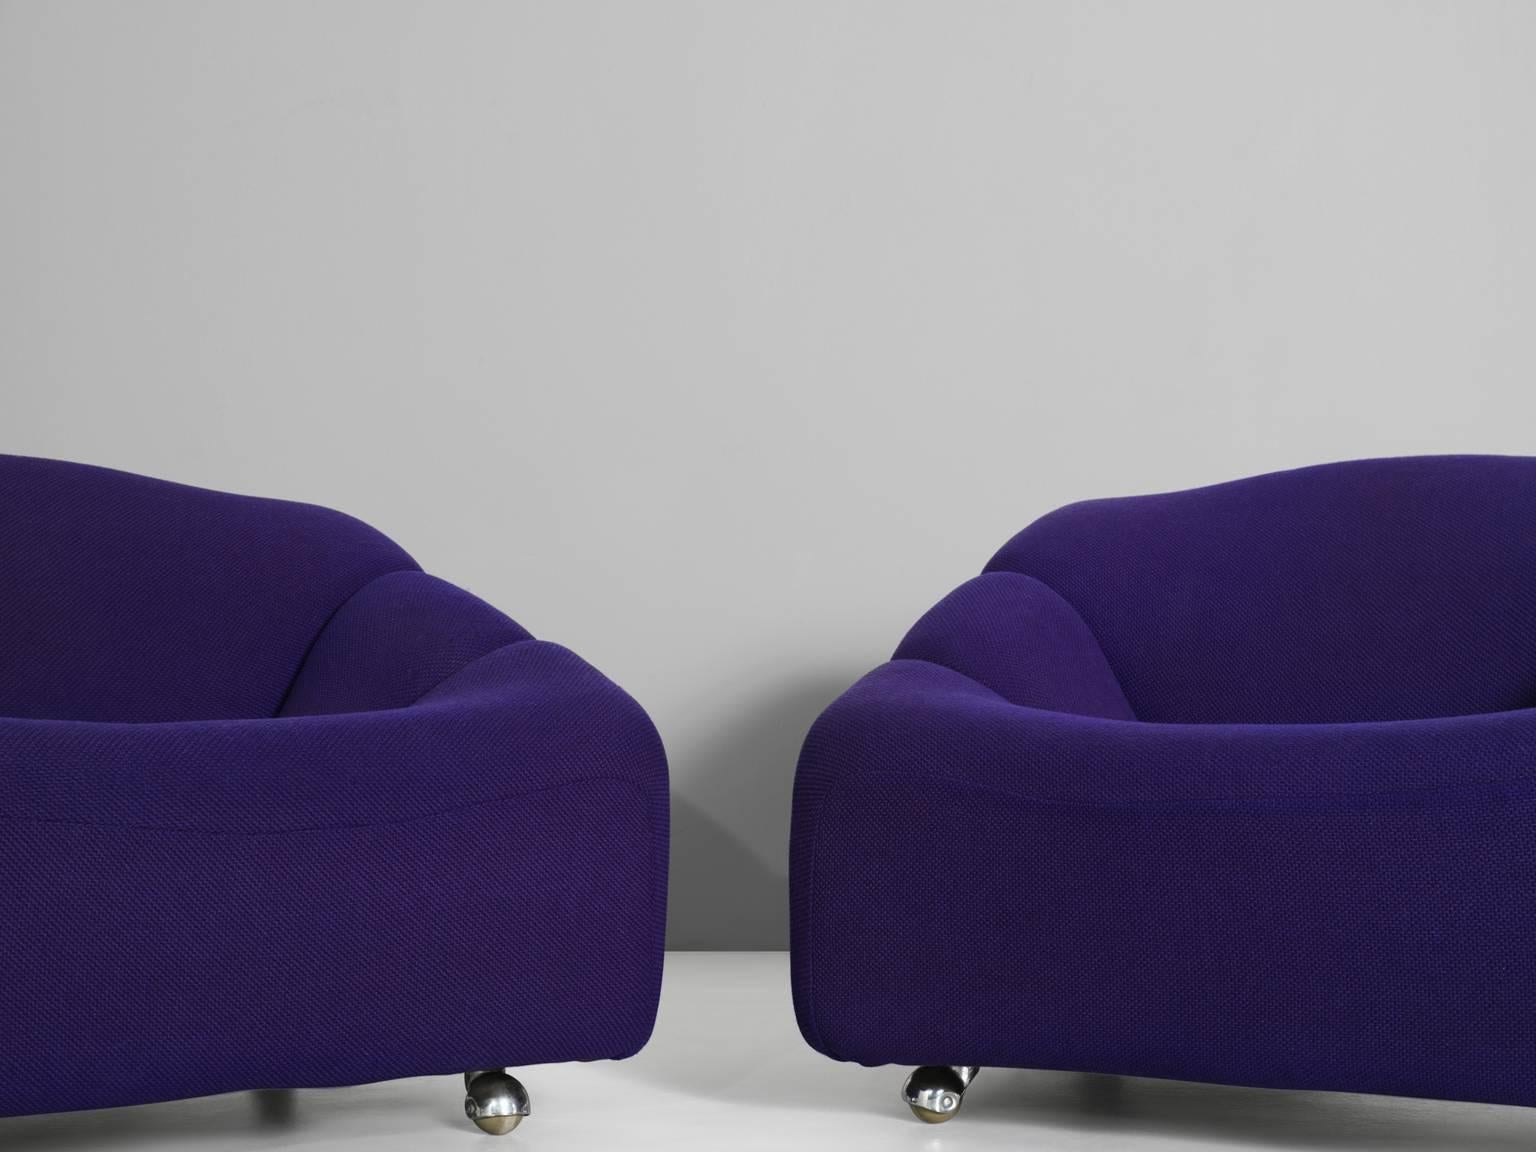 Mid-20th Century Pierre Paulin Two Lounge Chairs in Purple from the ABCD Series for Artifort